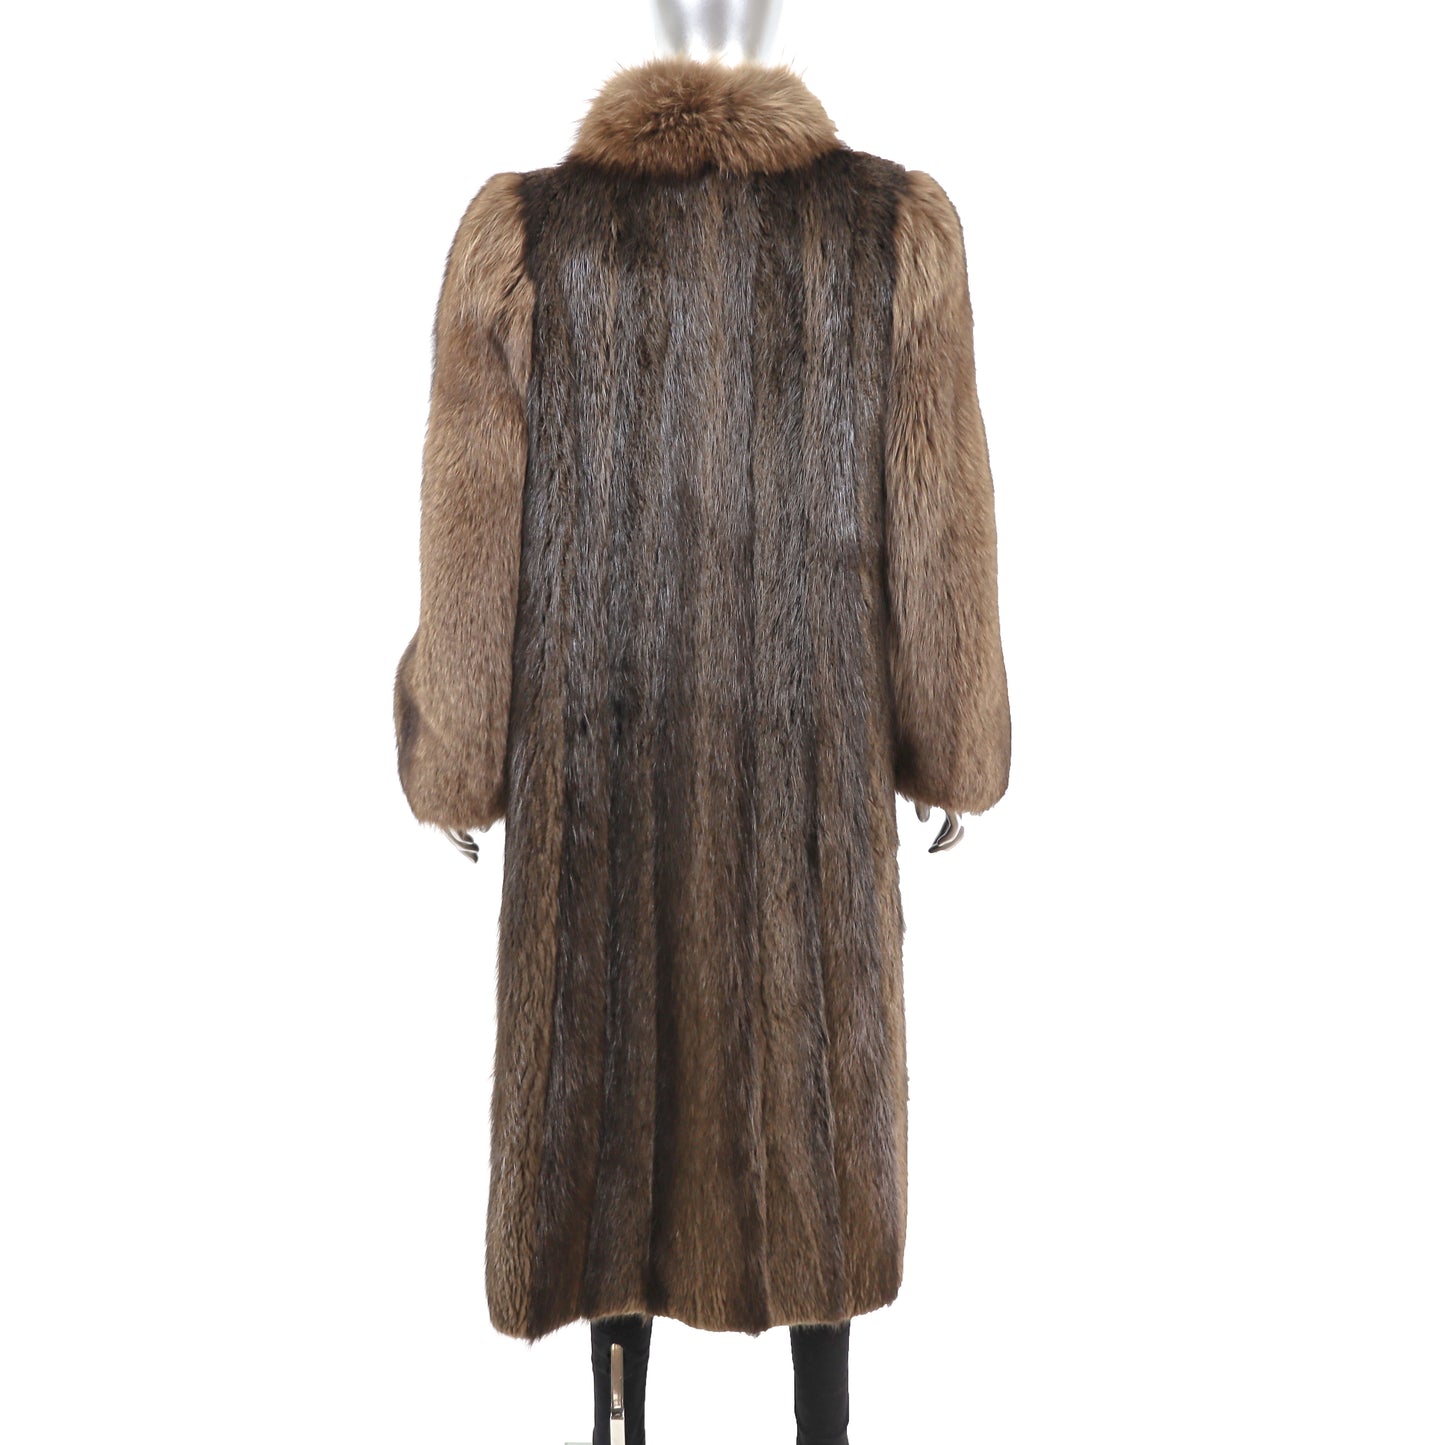 Long Hair Beaver Coat with Fox Collar and Sleeves- Size S